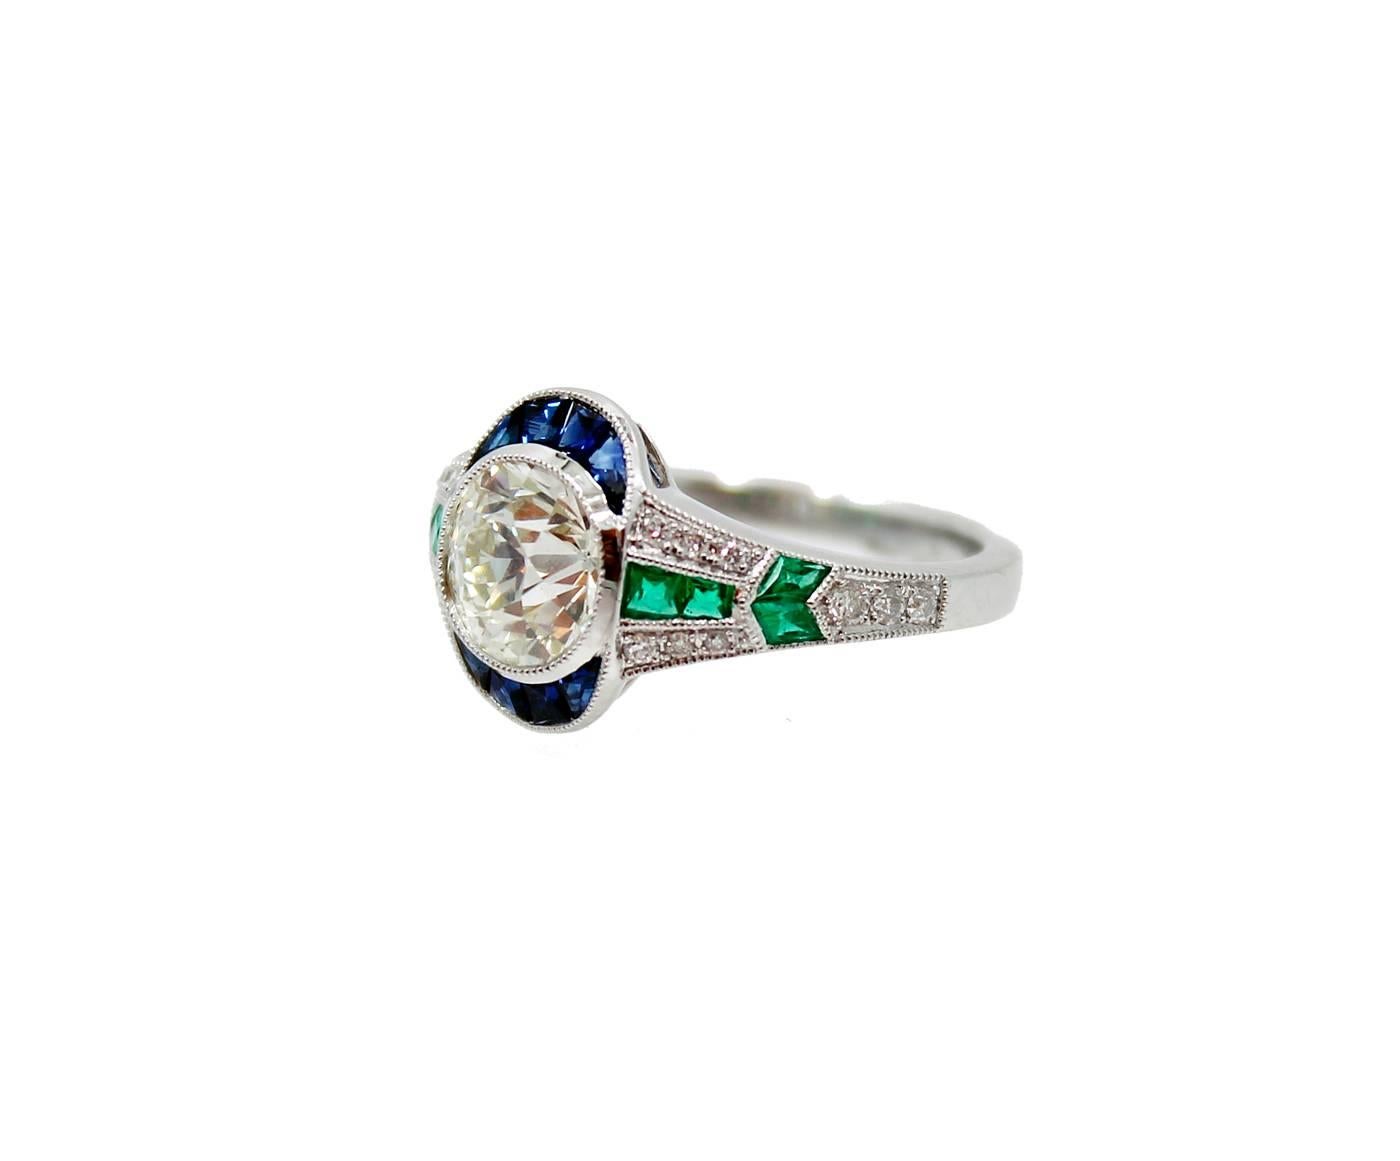 Art Deco Platinum Ring with a 1.57carat Old Mine Cut Diamond 8 Sapphires which equal .29 carats and 8 Emeralds which equal .29 carats. The ring is a size 7 and it is in pristine condition.